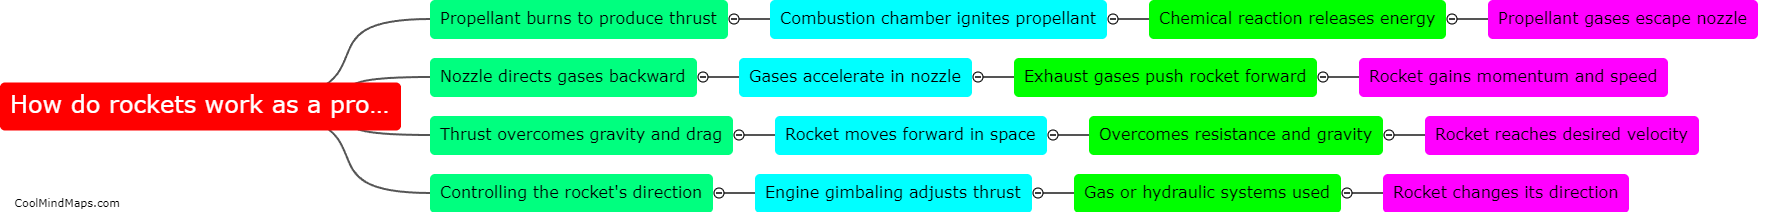 How do rockets work as a propulsion system?